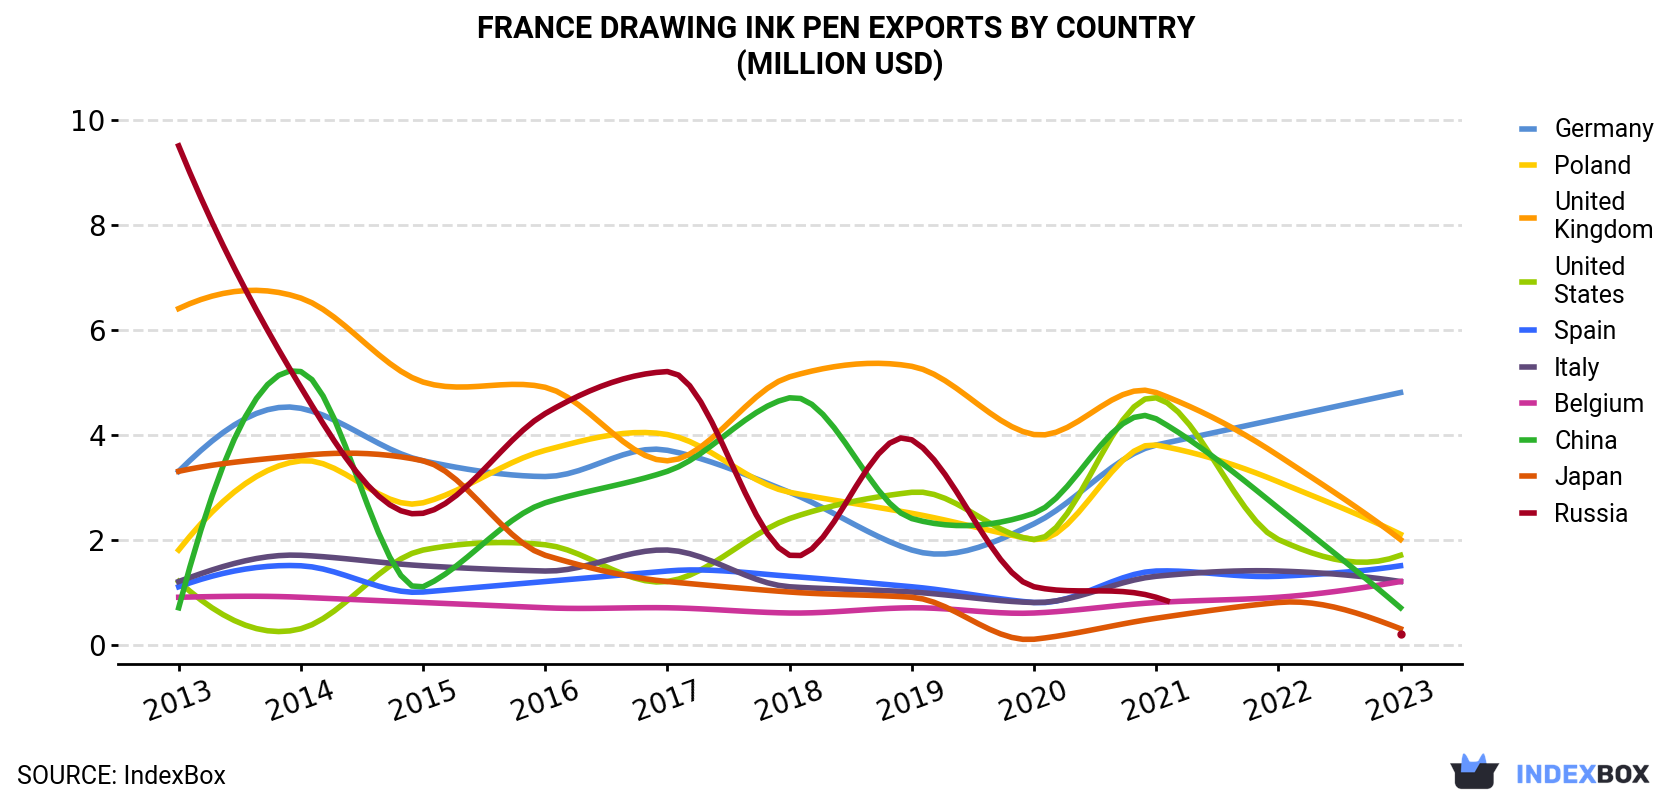 France Drawing Ink Pen Exports By Country (Million USD)